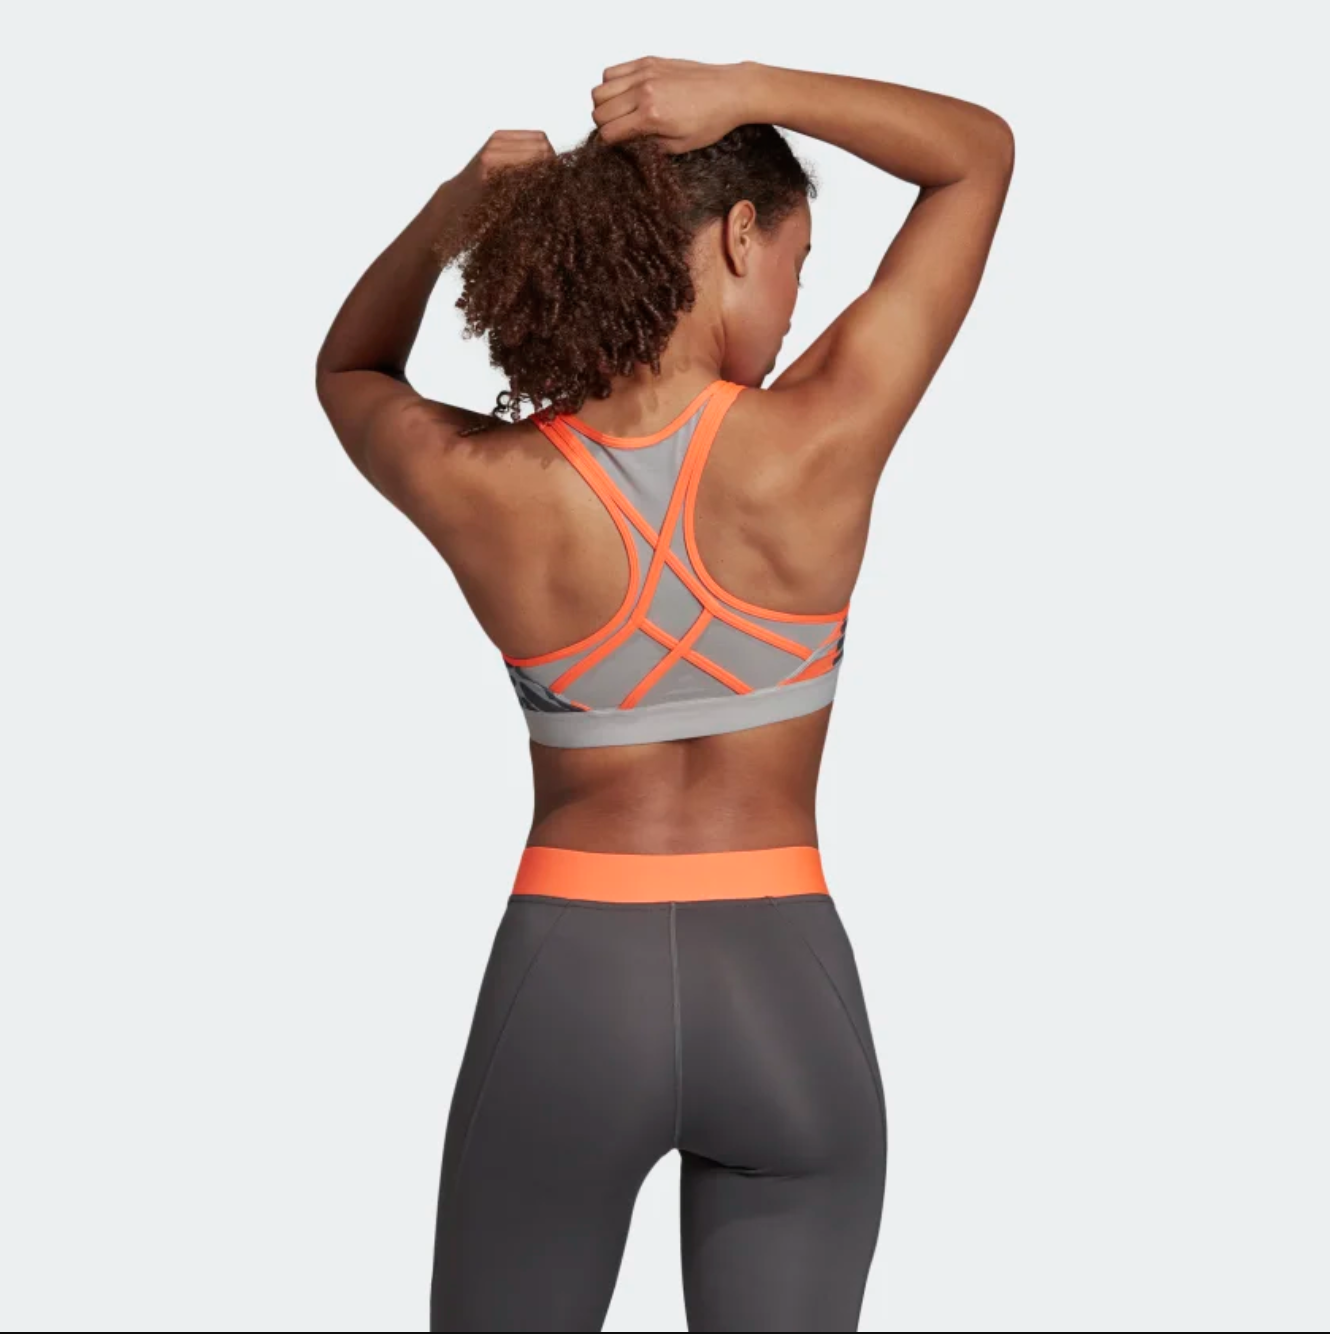 Need Some Workout Inspo? Shop This Cute Activewear And Turn Heads In The Gym